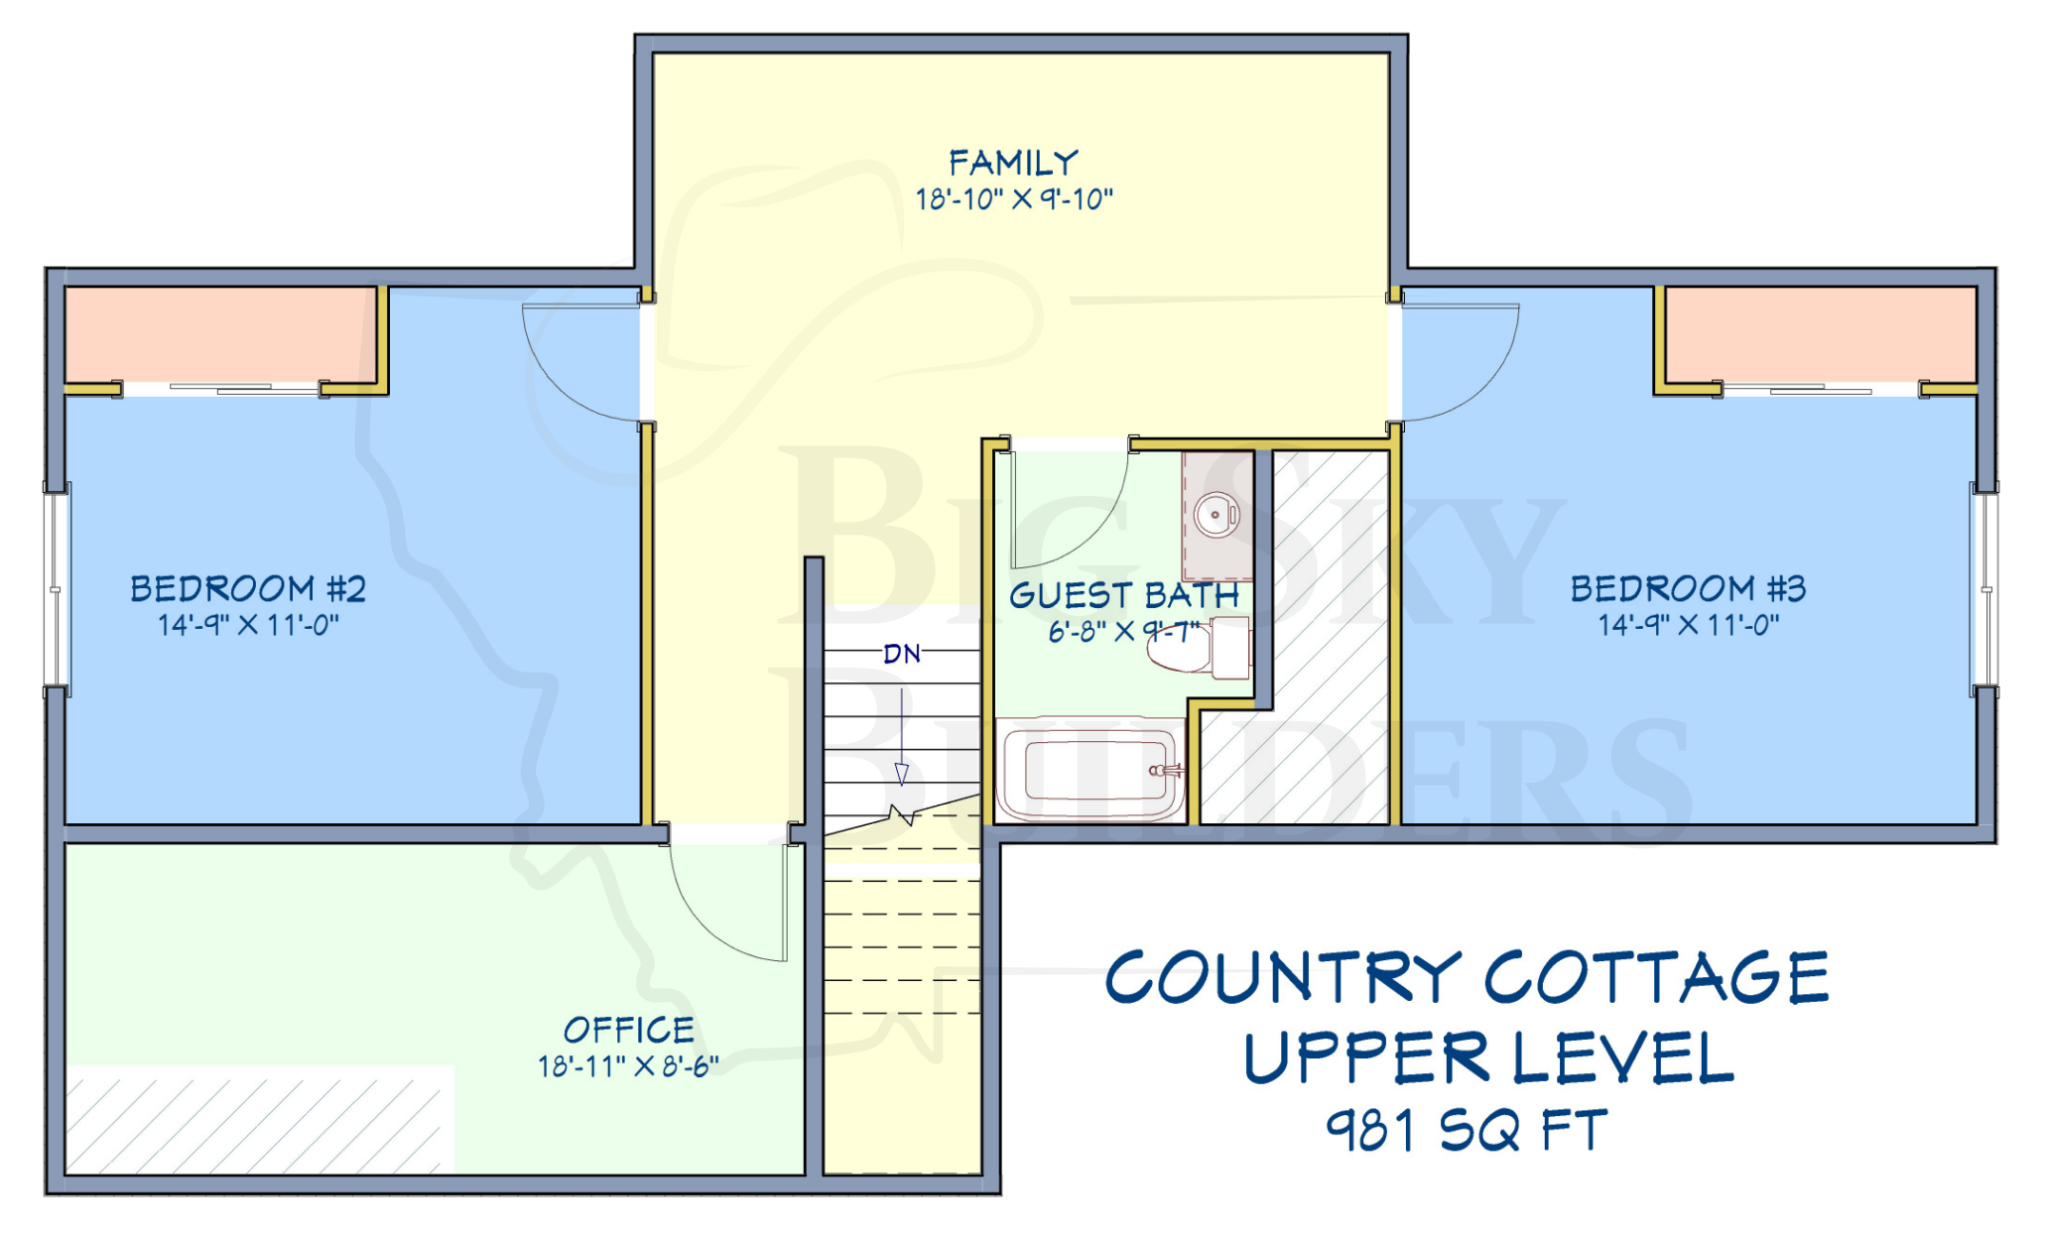 Country Cottage model home upper level floor plan - by Big Sky Builders of Montana